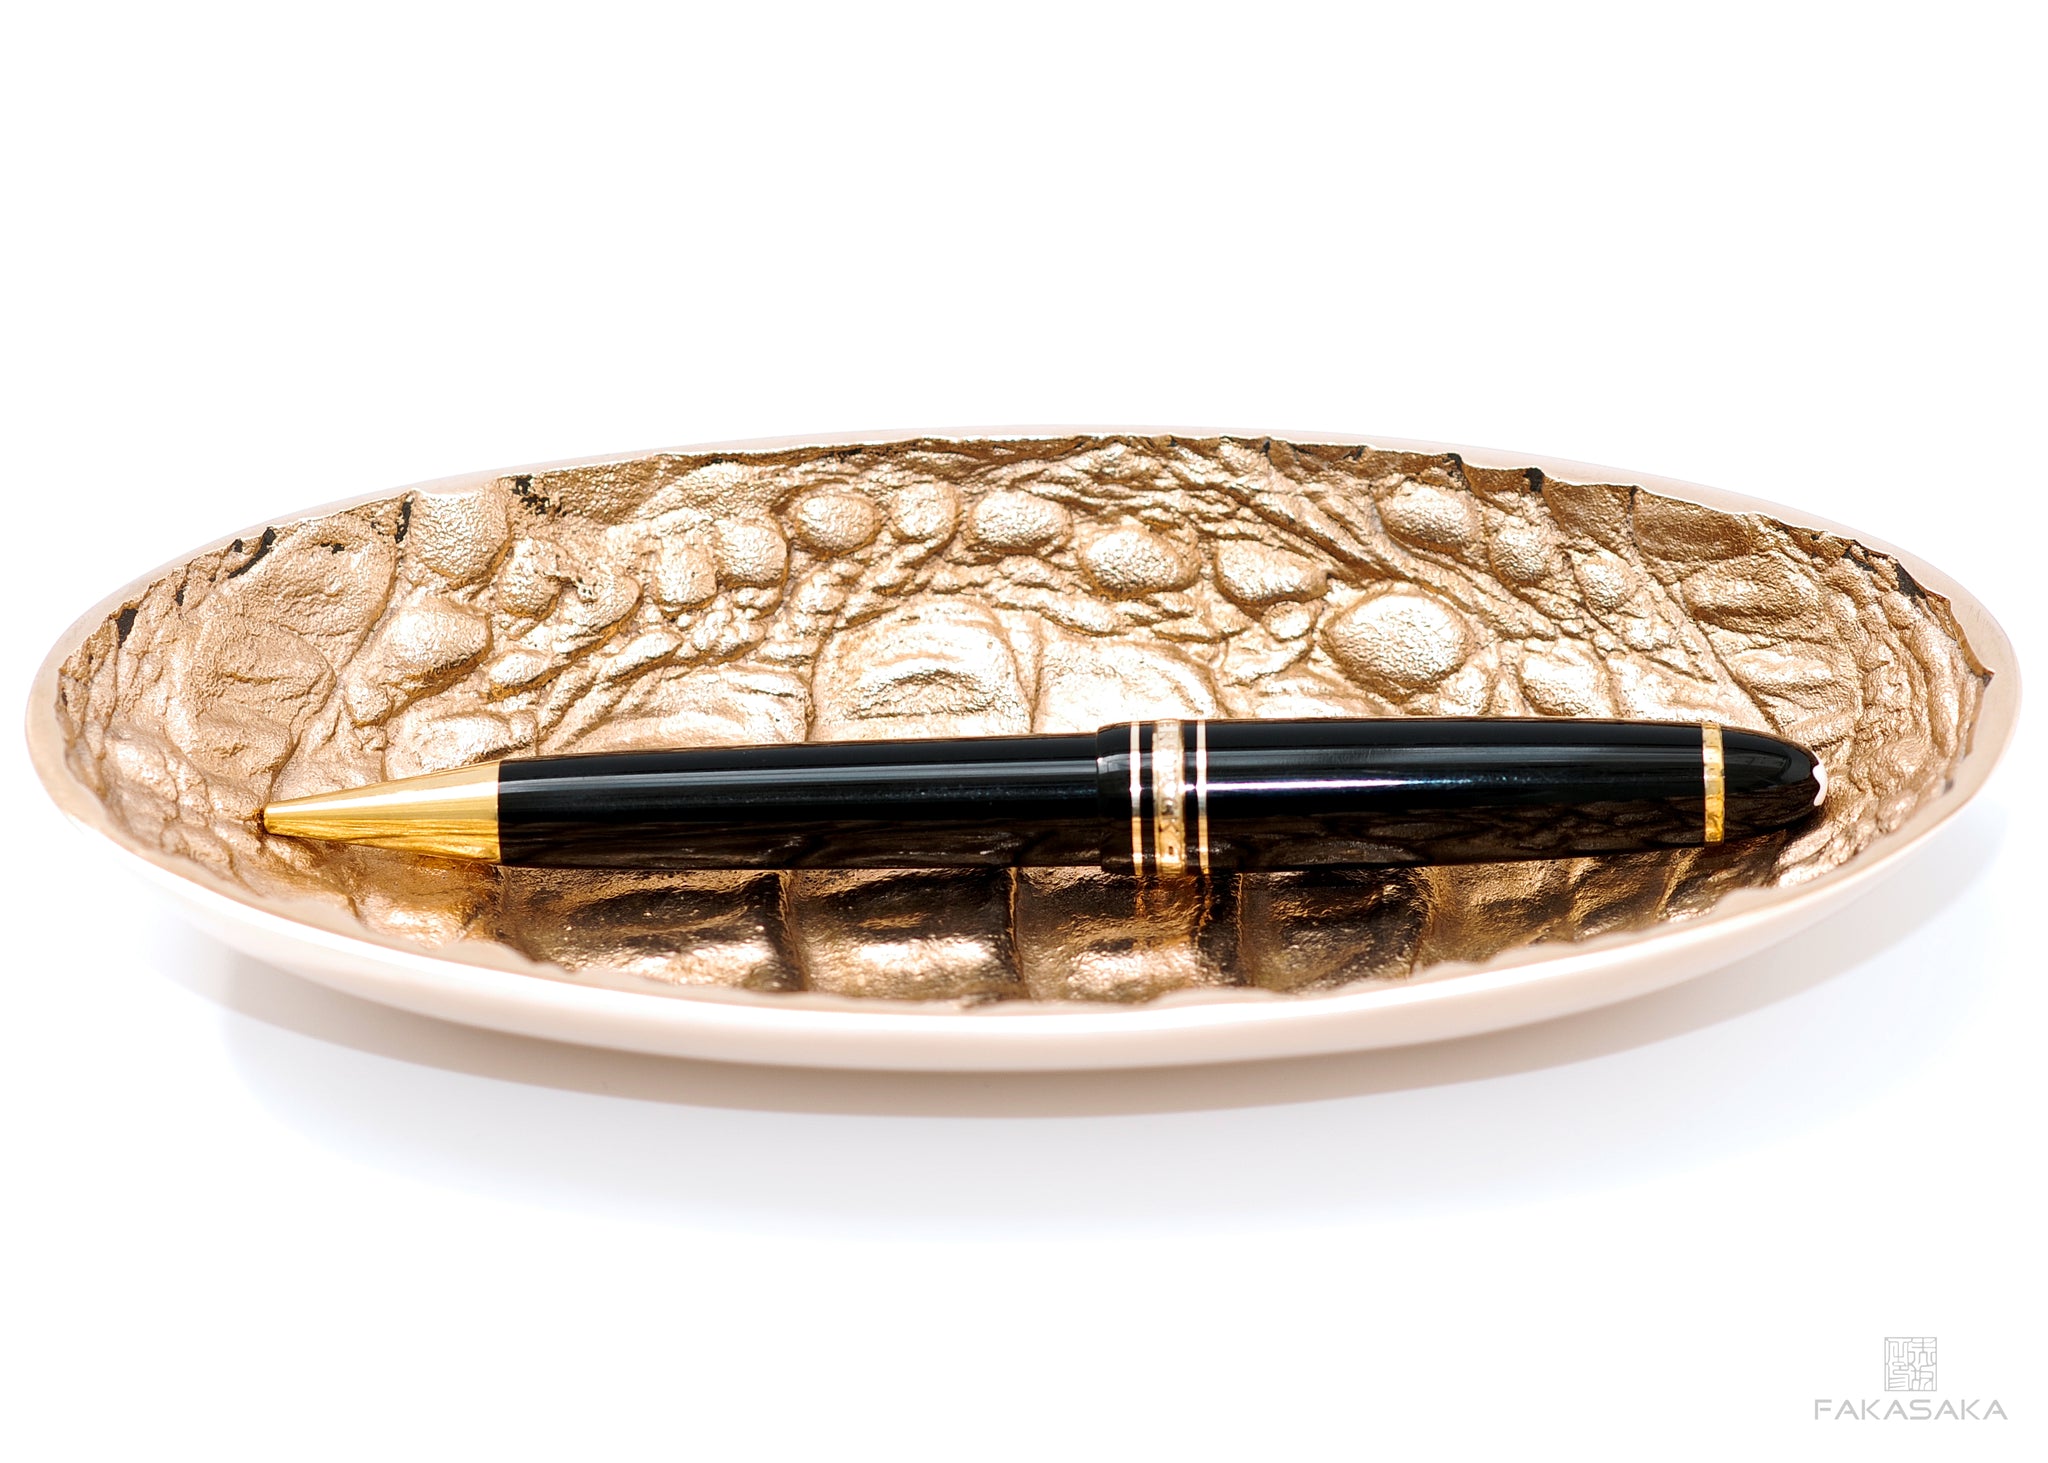 POLLY JEAN<br><br>SMALL TRAY / SMALL BOWL / ASHTRAY / CARD HOLDER / PEN HOLDER<br><br>POLISHED BRONZE